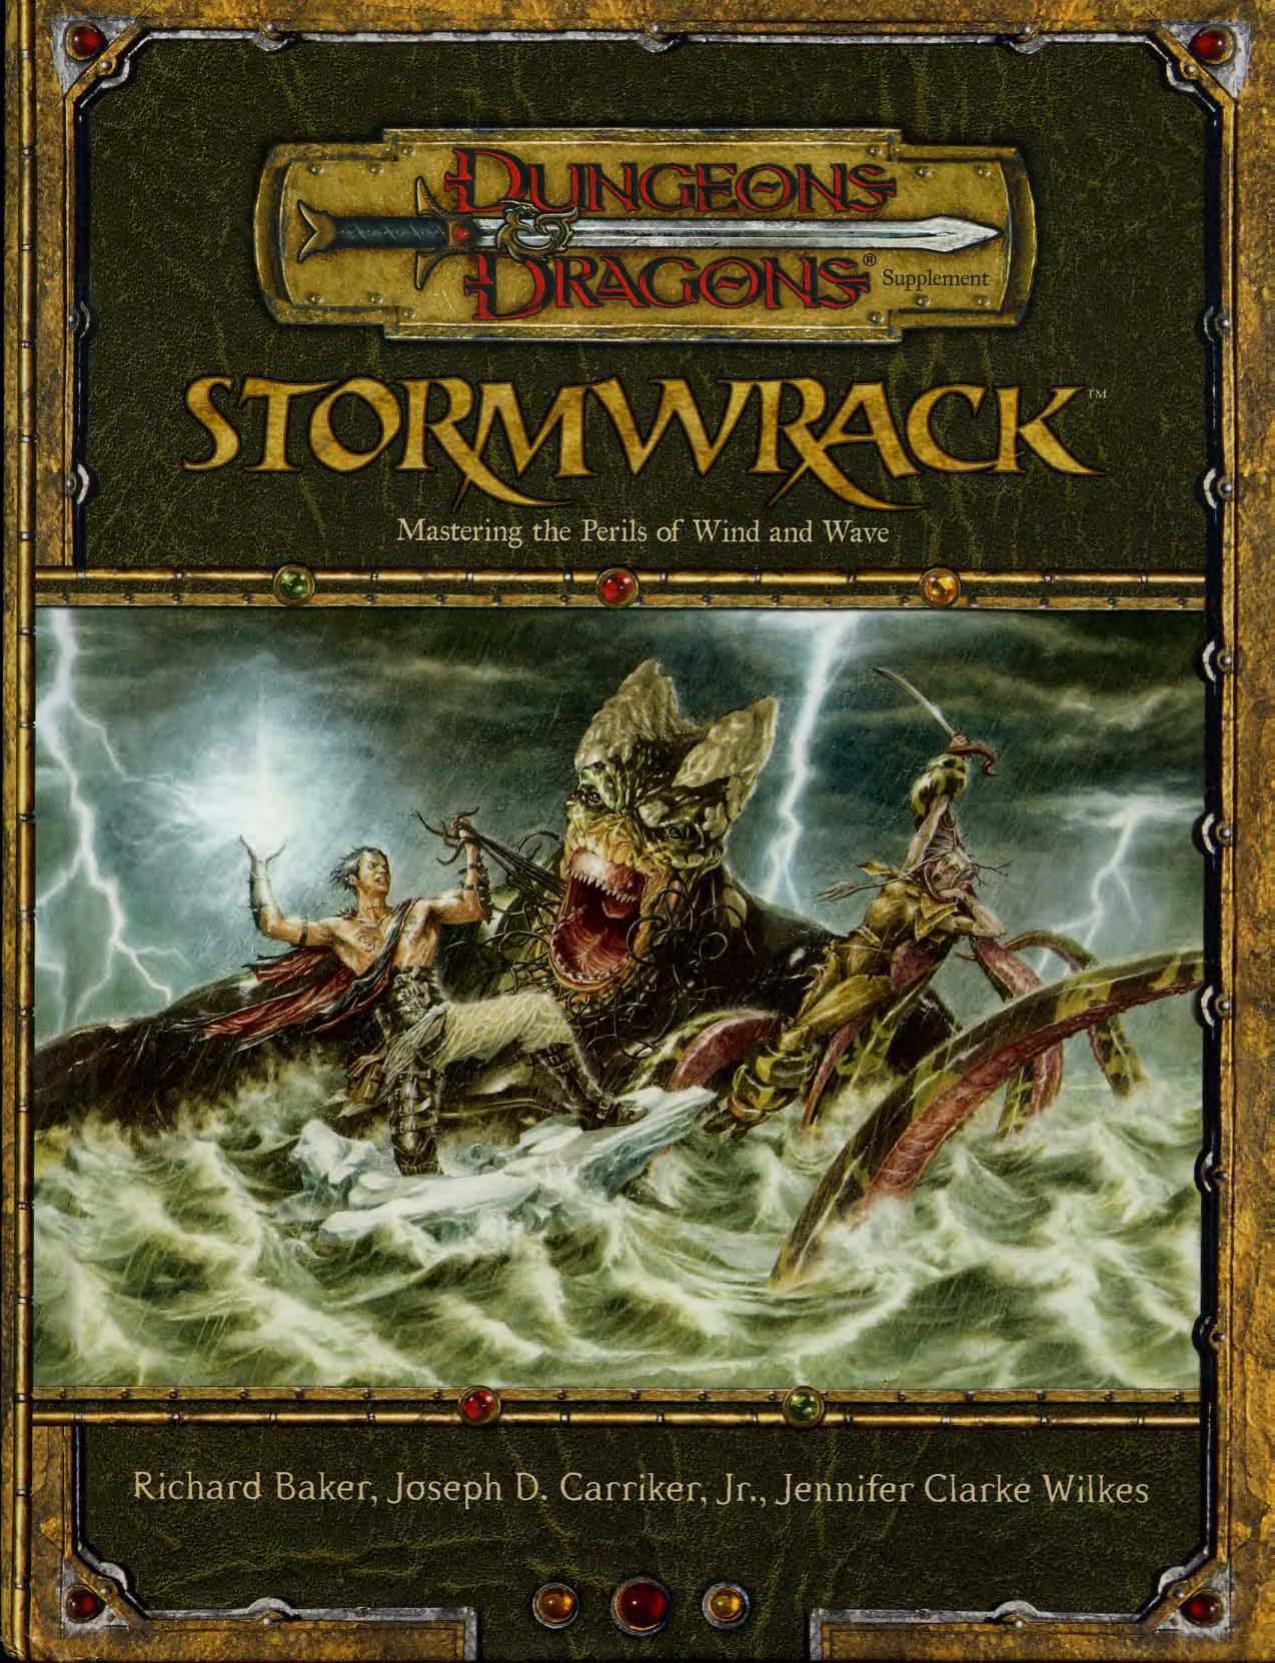 Stormwrack: Mastering the Perils of Wind and Wave